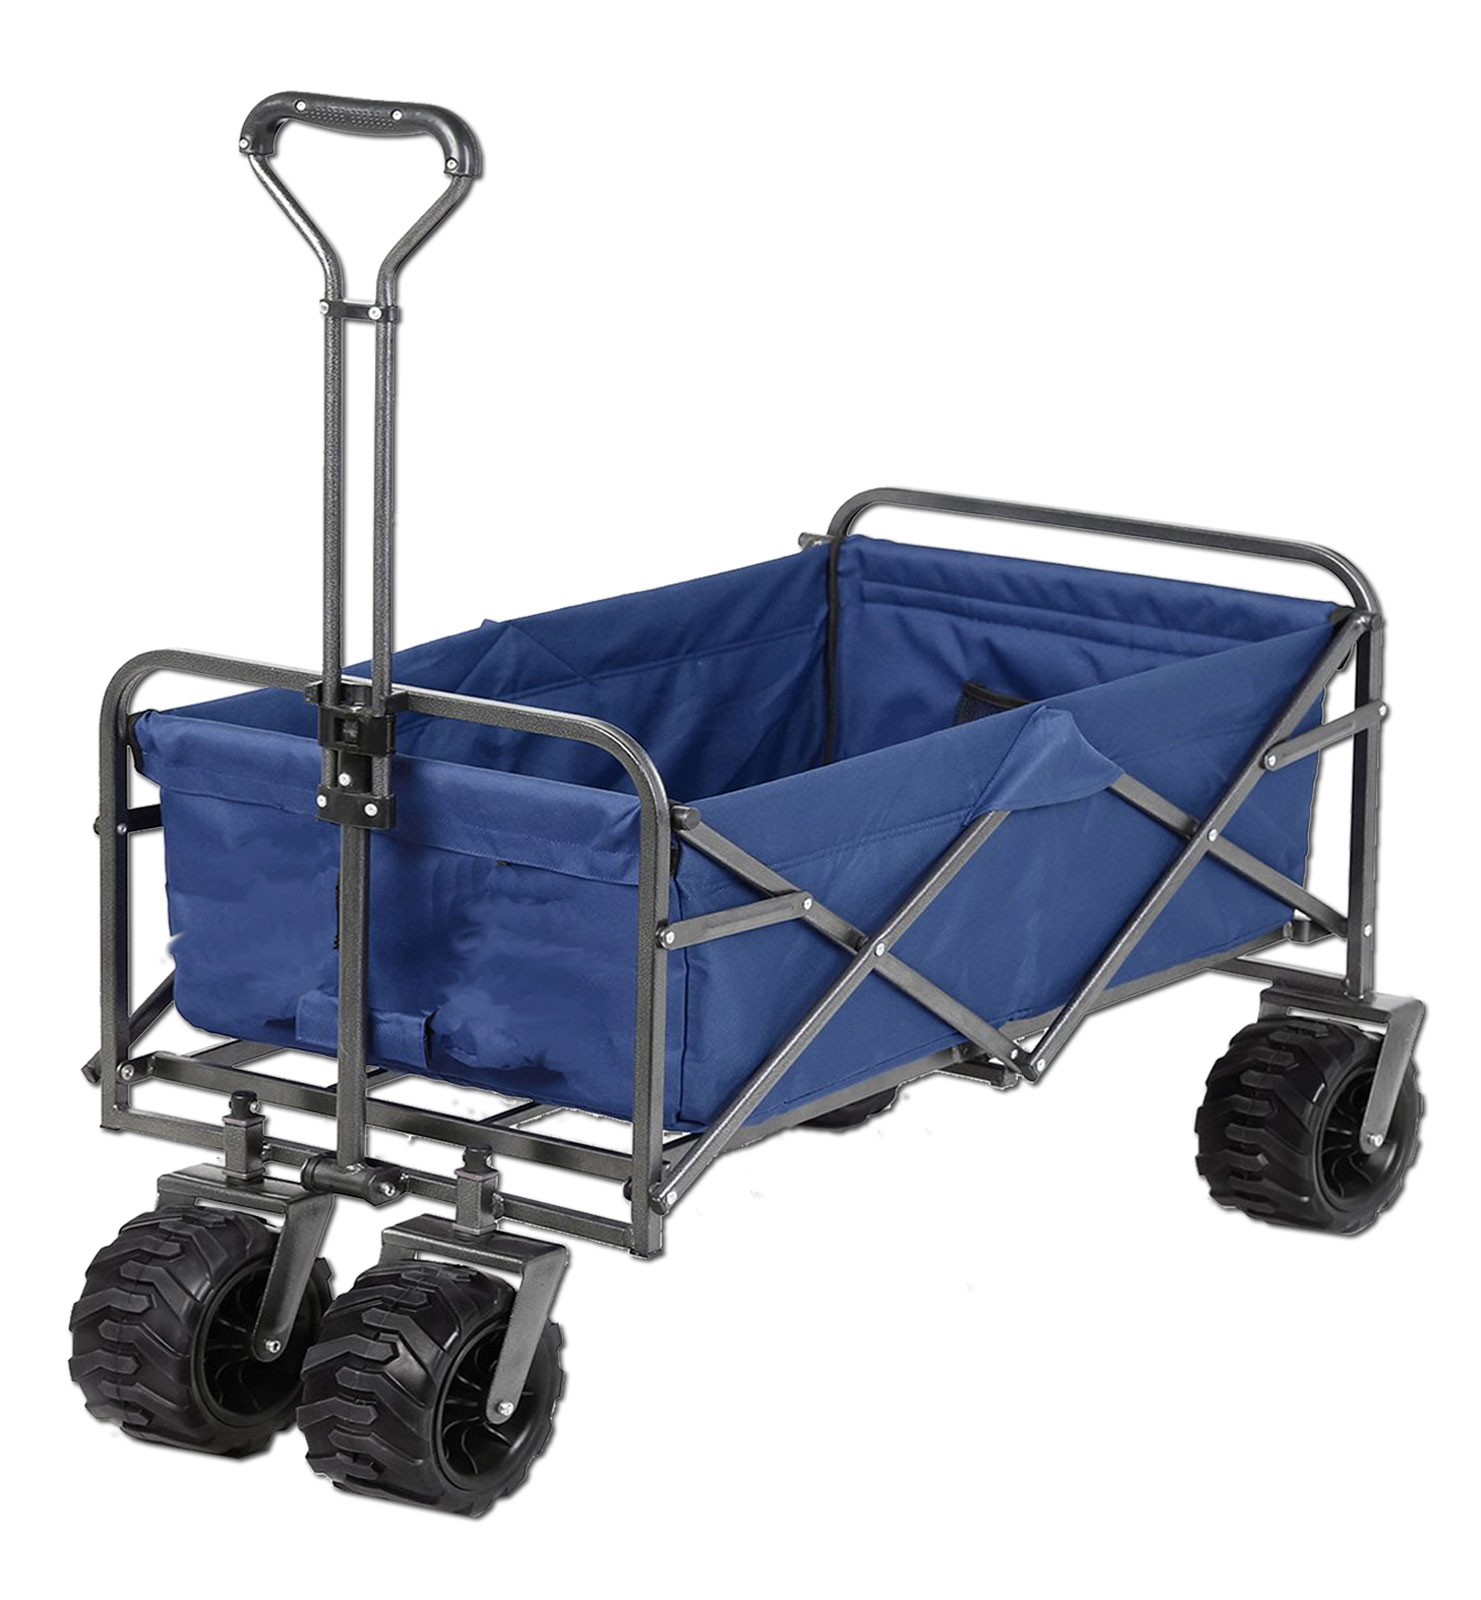 Timber Ridge Camping Wagon Folding Garden Cart Shopping Trolley Collapsible Heavy Duty Utility Use Blue Side Bag 